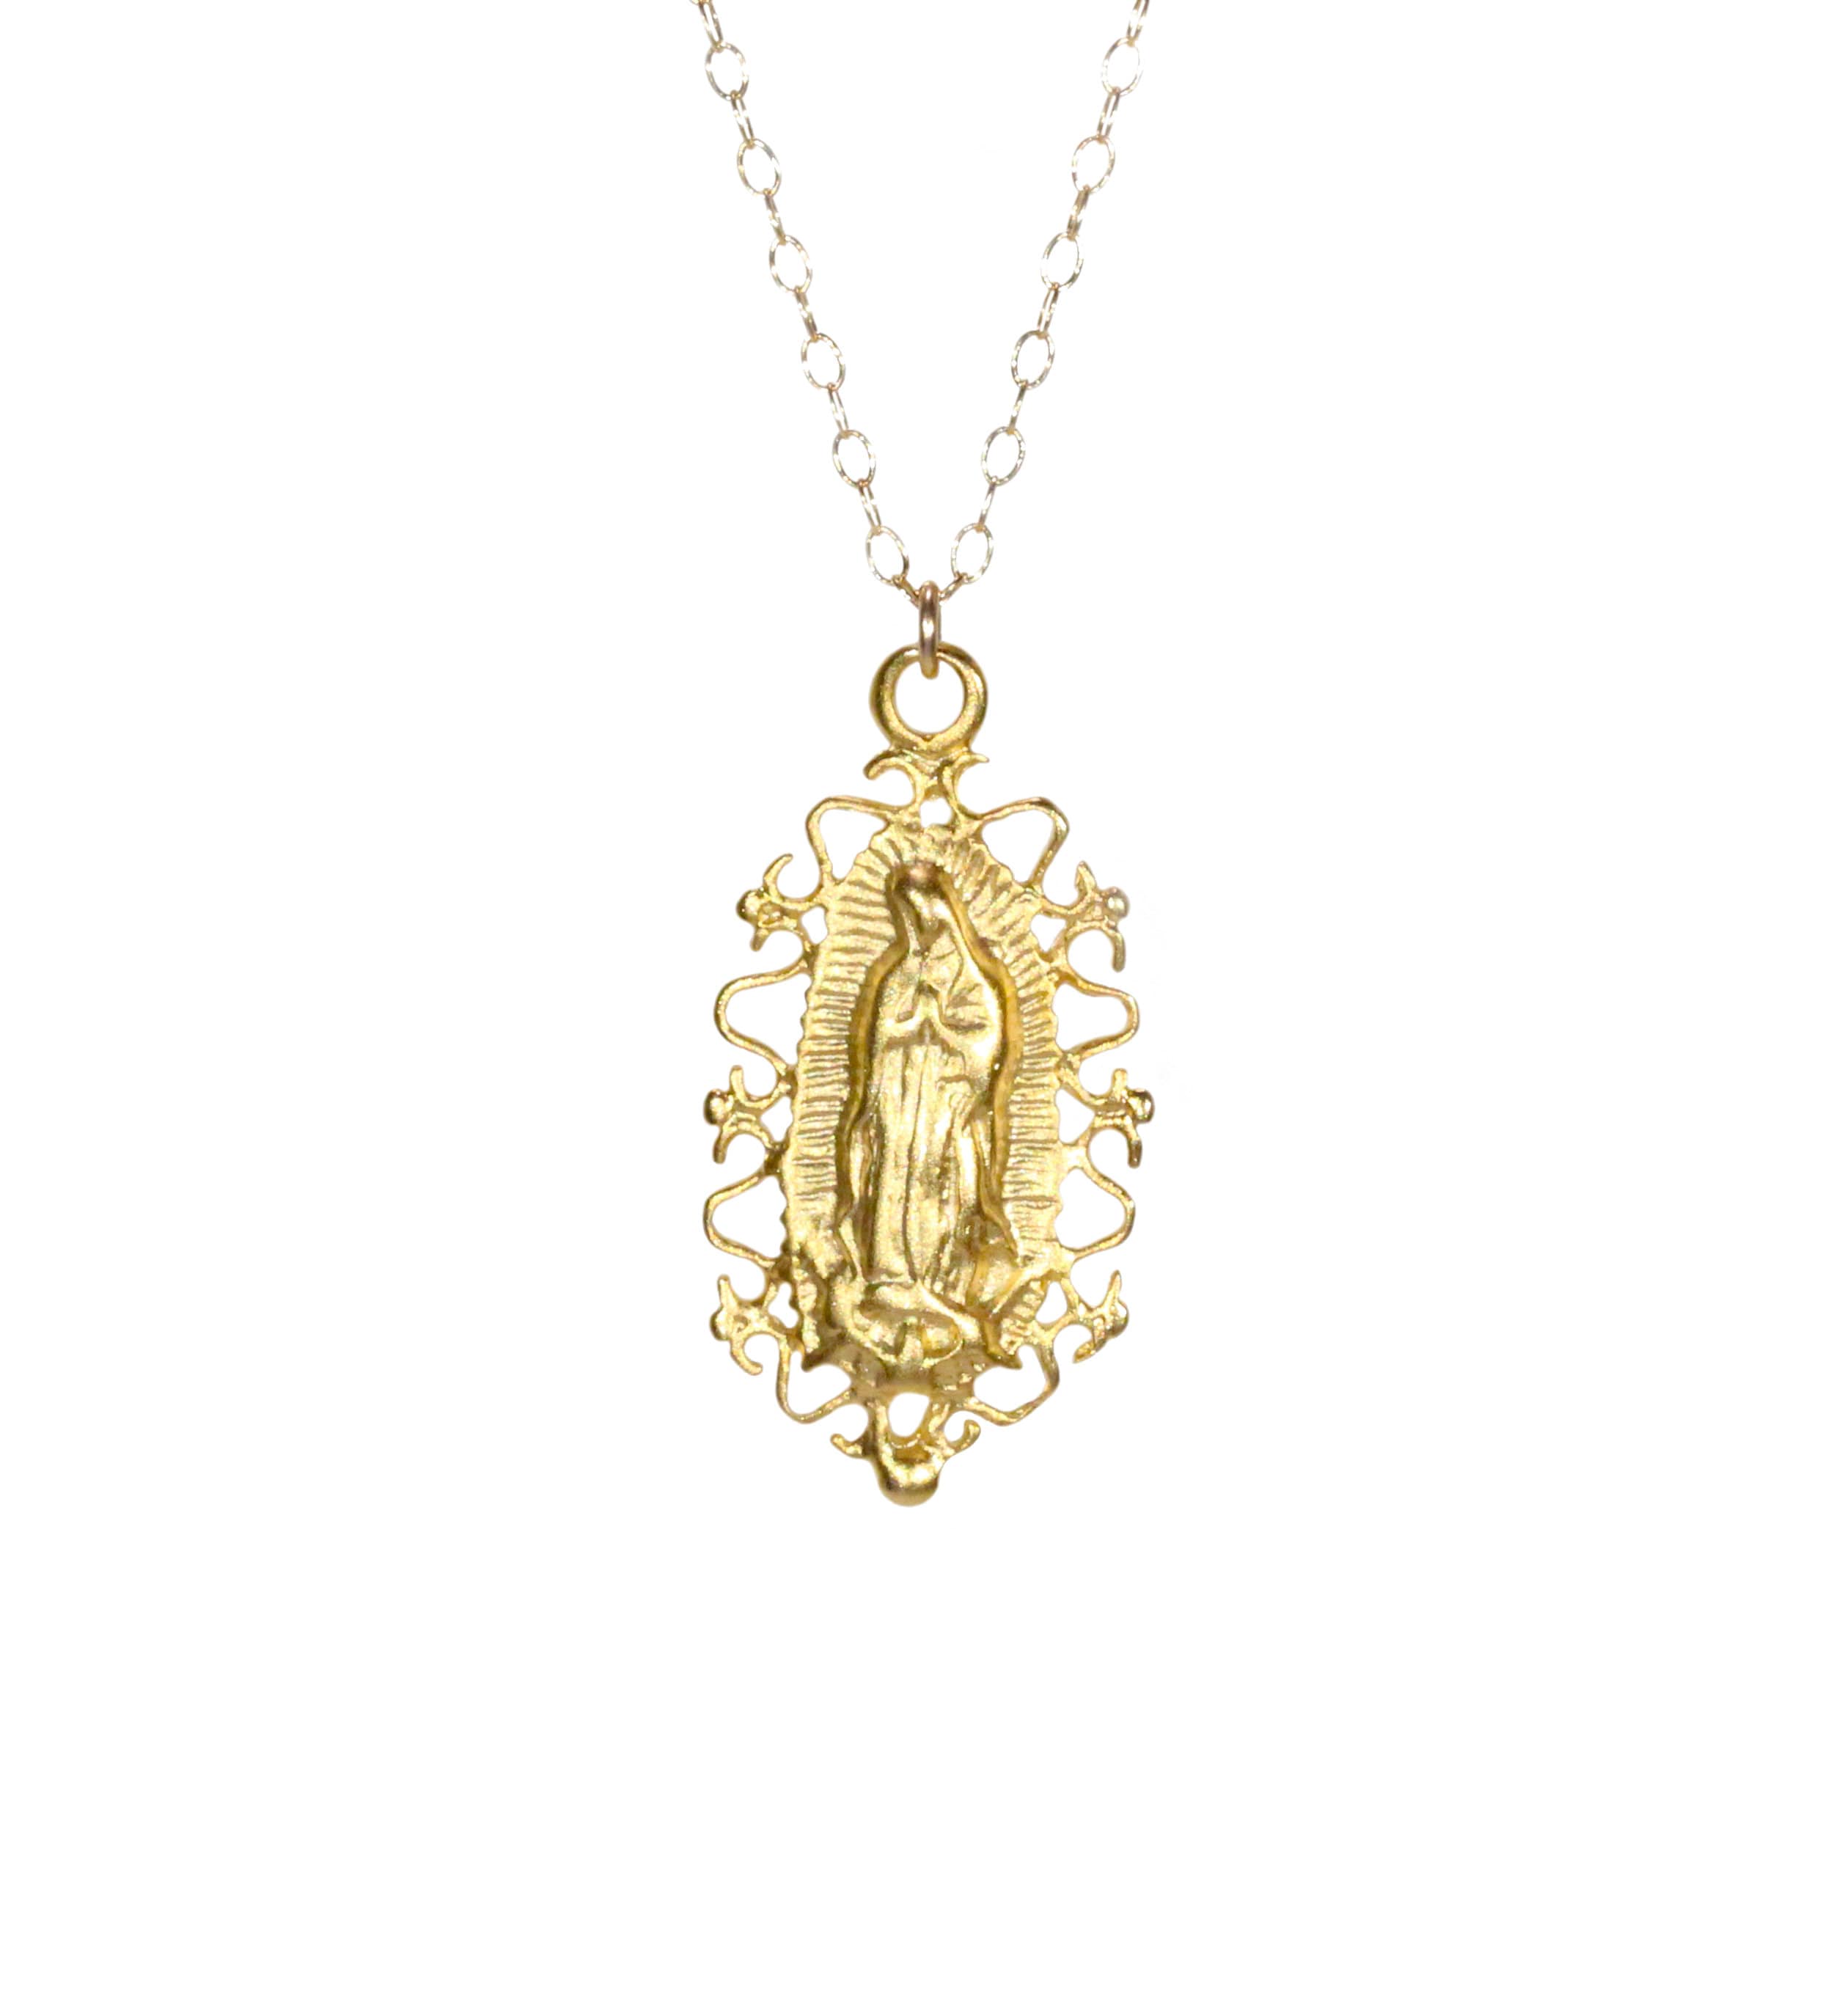 Virgin Mary Jewelry in Gold & Silver | The Little Catholic